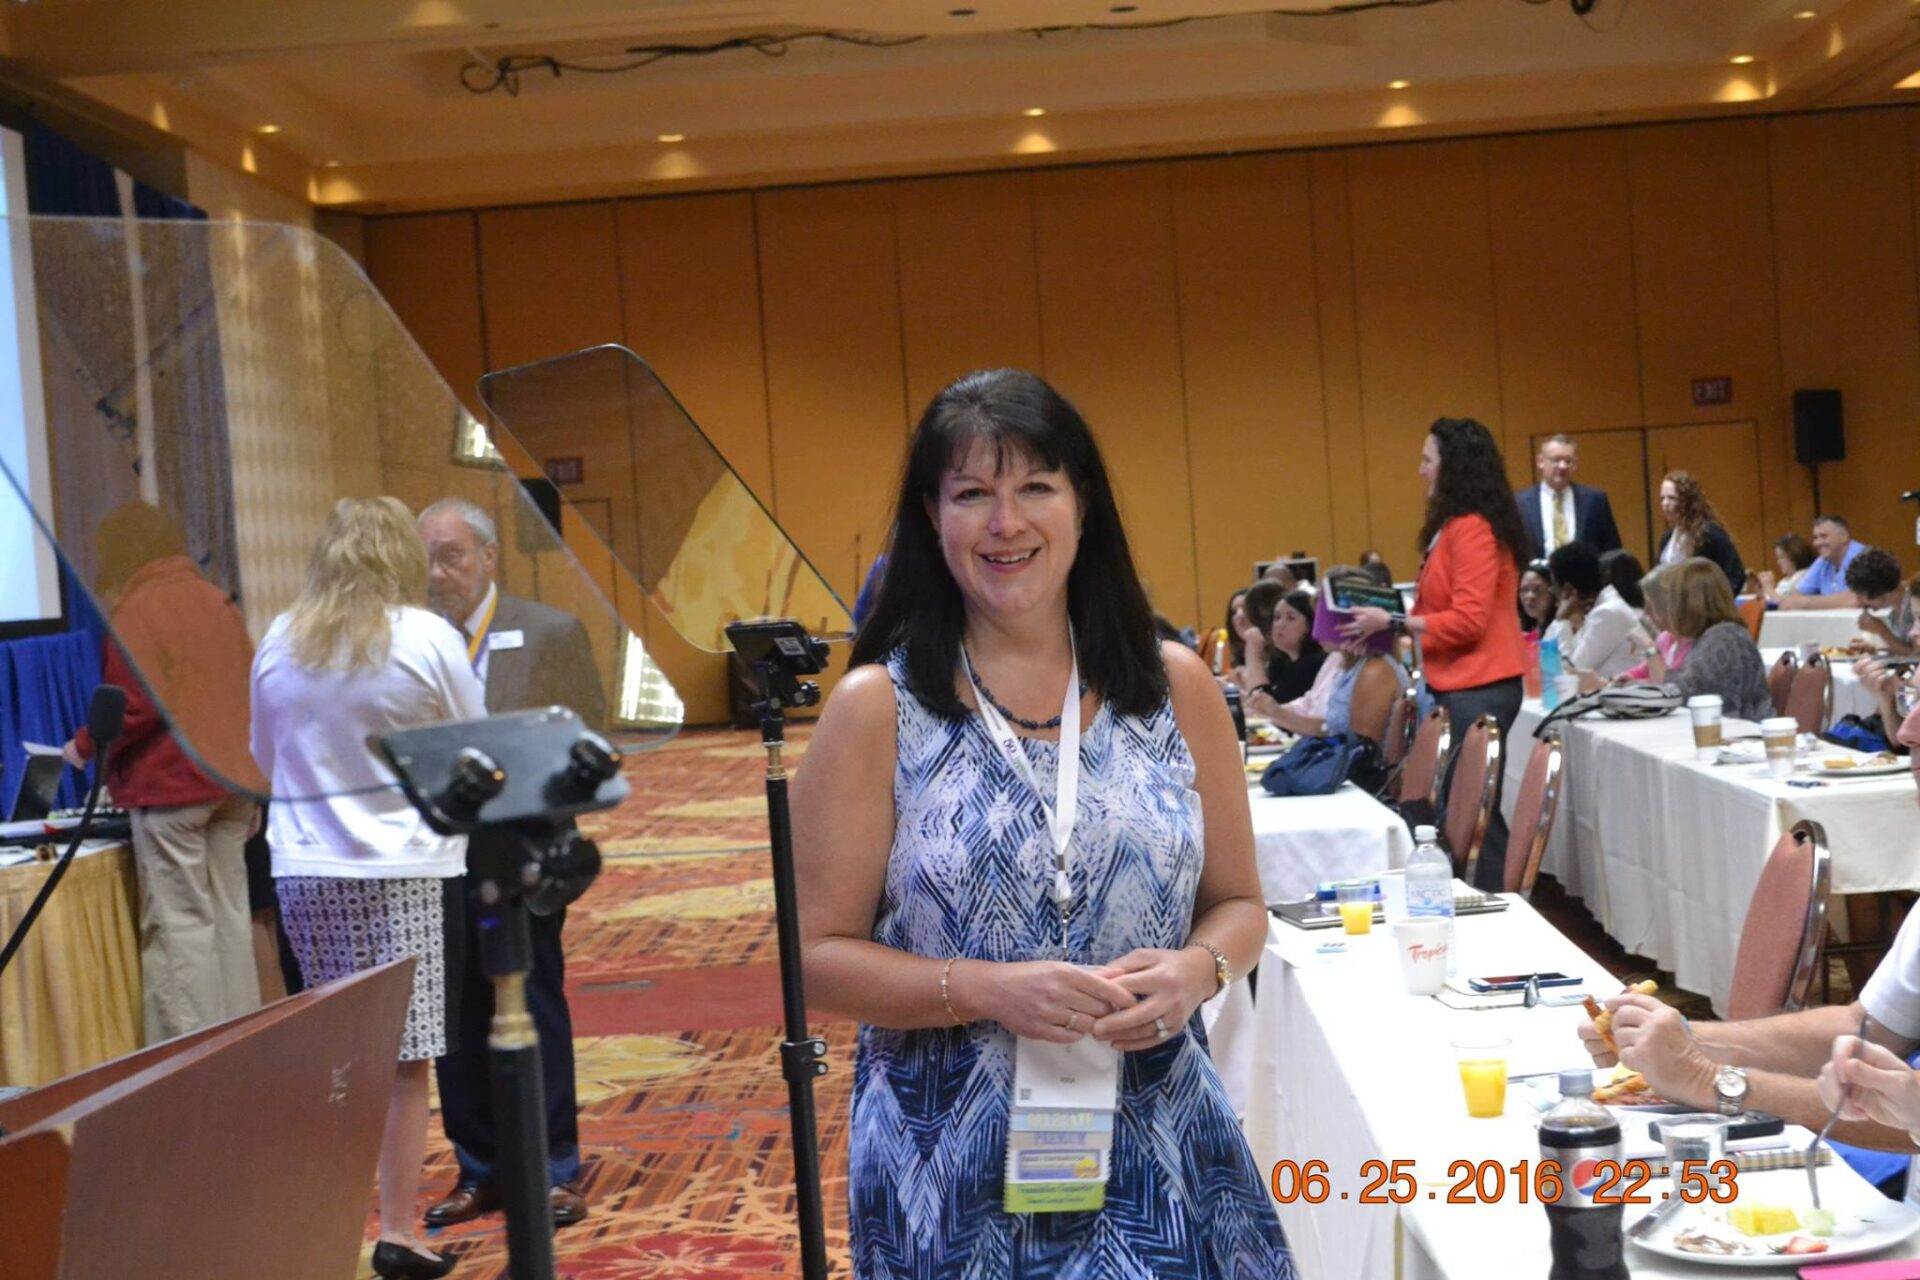 A woman standing in front of a conference table.